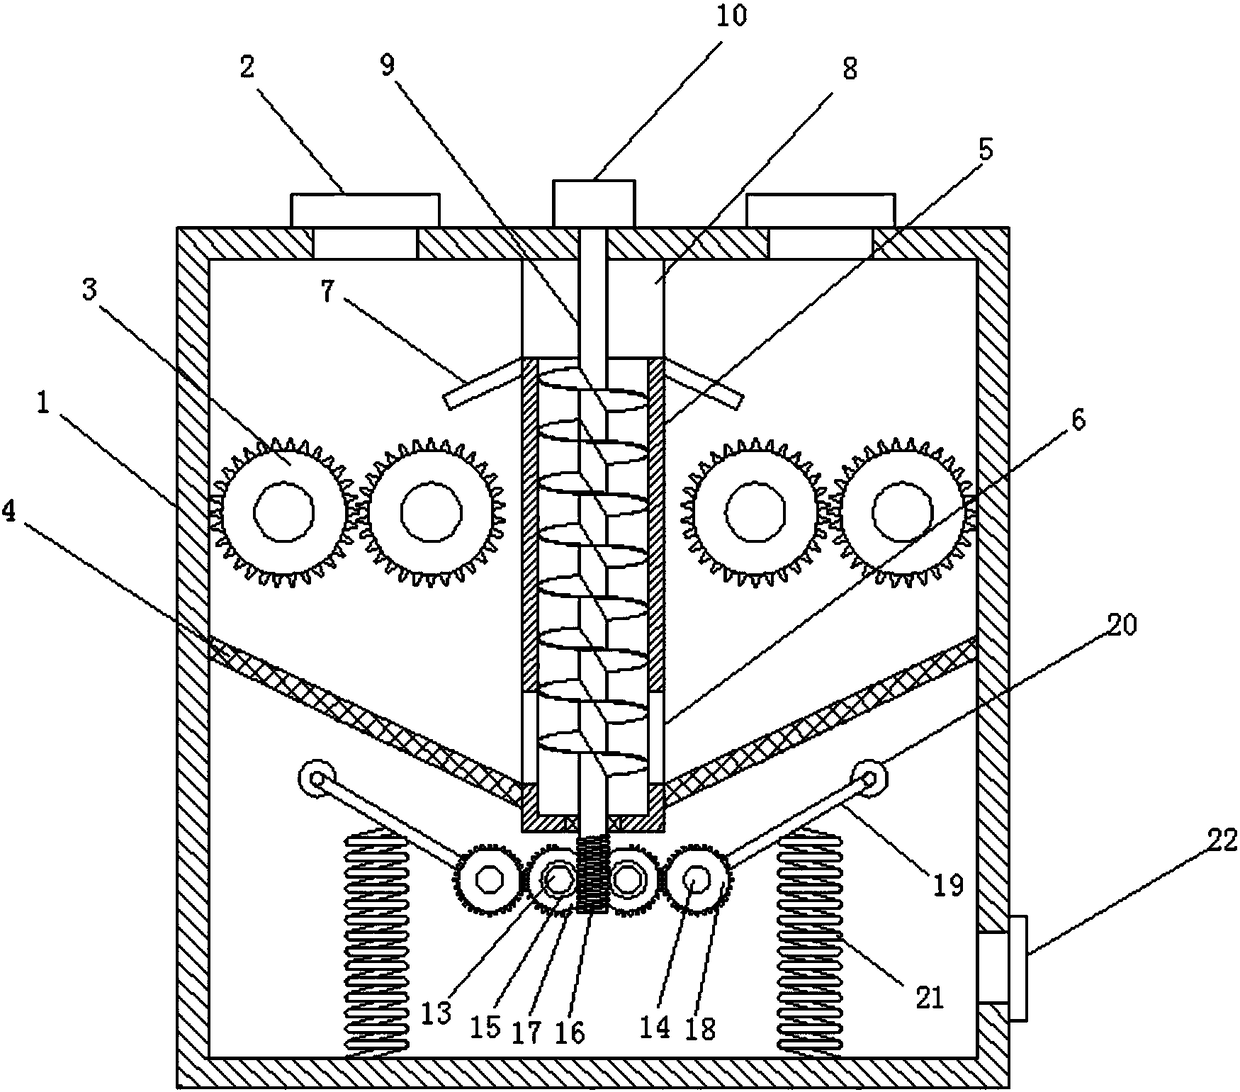 Cyclic type feed particle smashing device